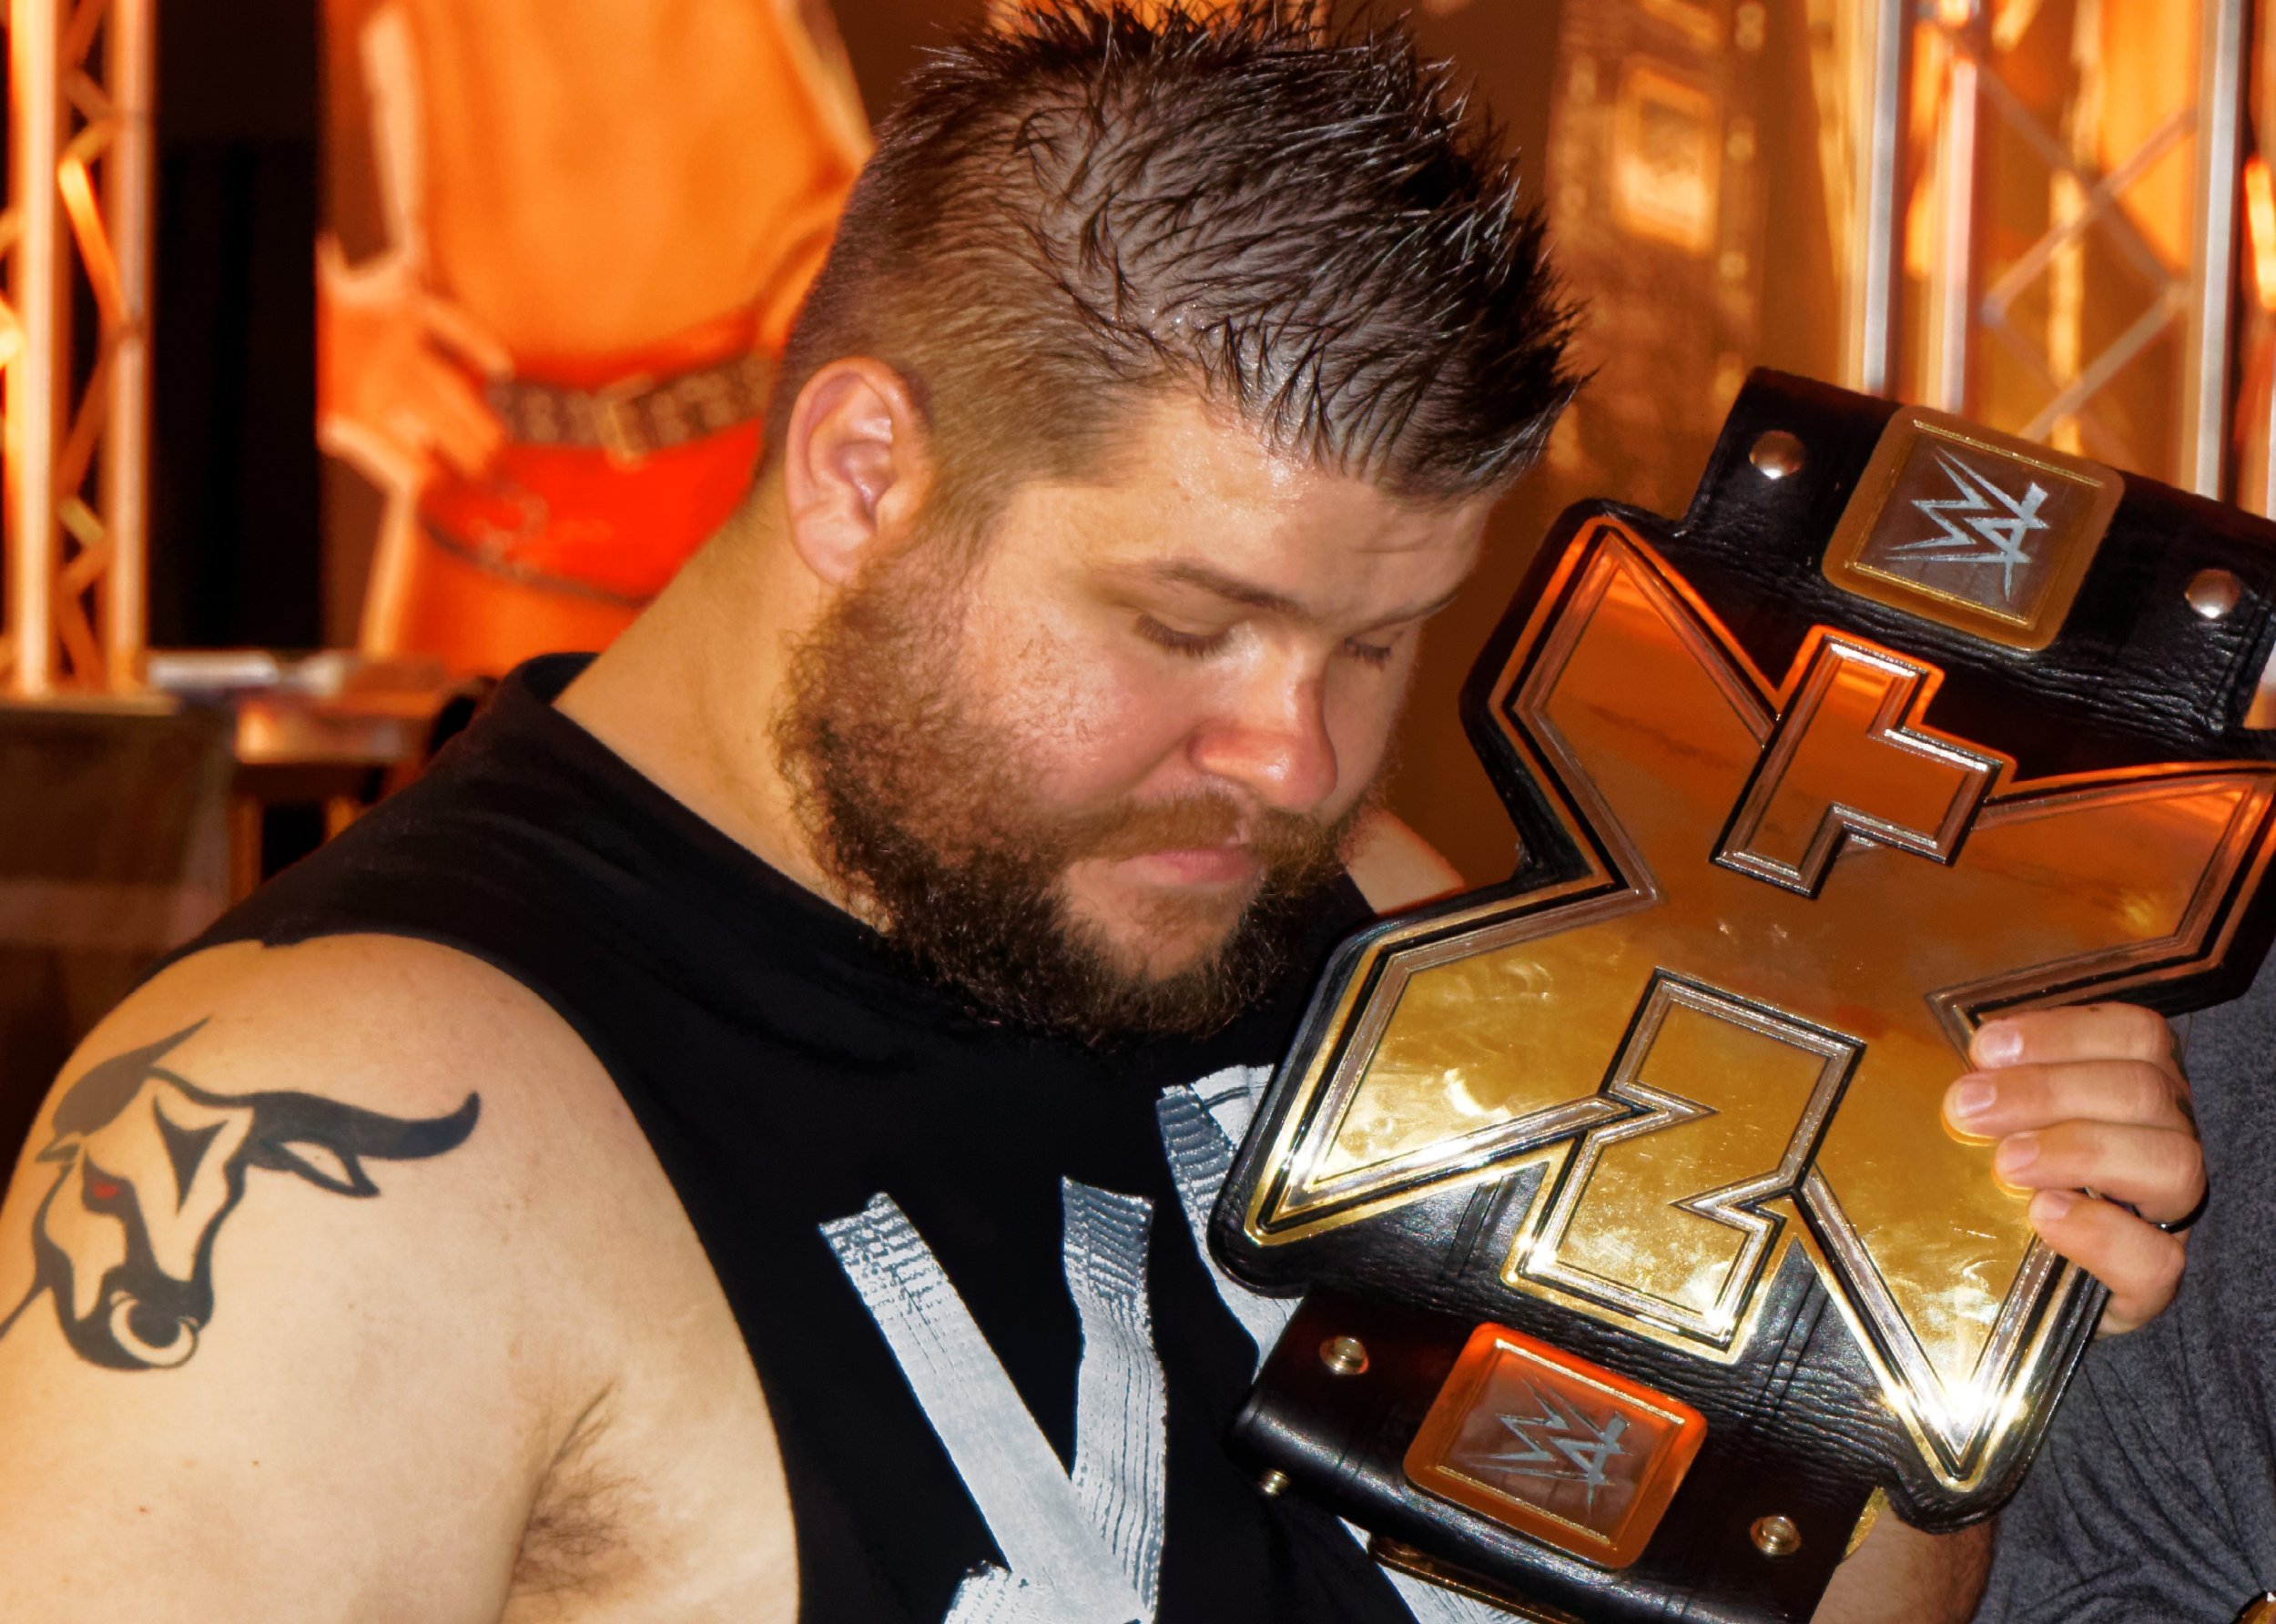 NXT Champion Kevin Owens Knocks Out John Cena In WWE RAW Debut, Will